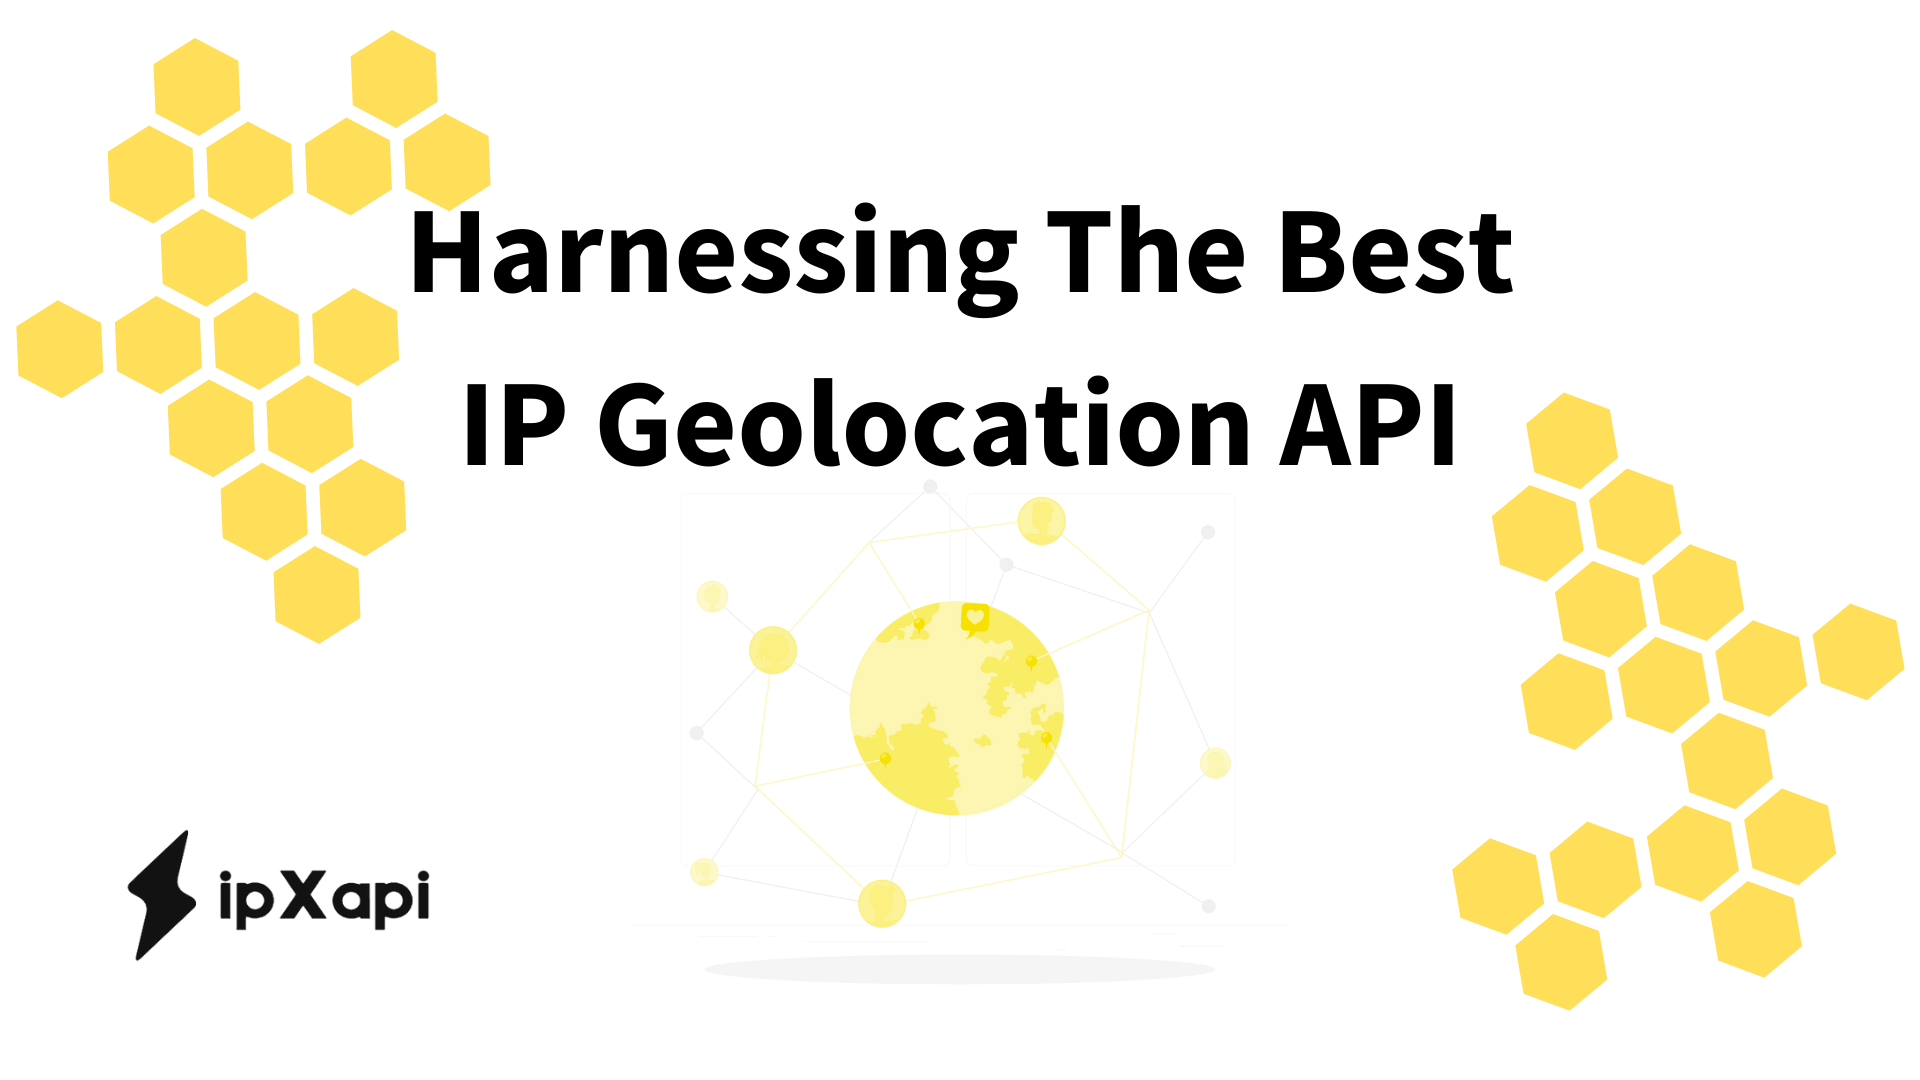 Harnessing The Best IP Geolocation API